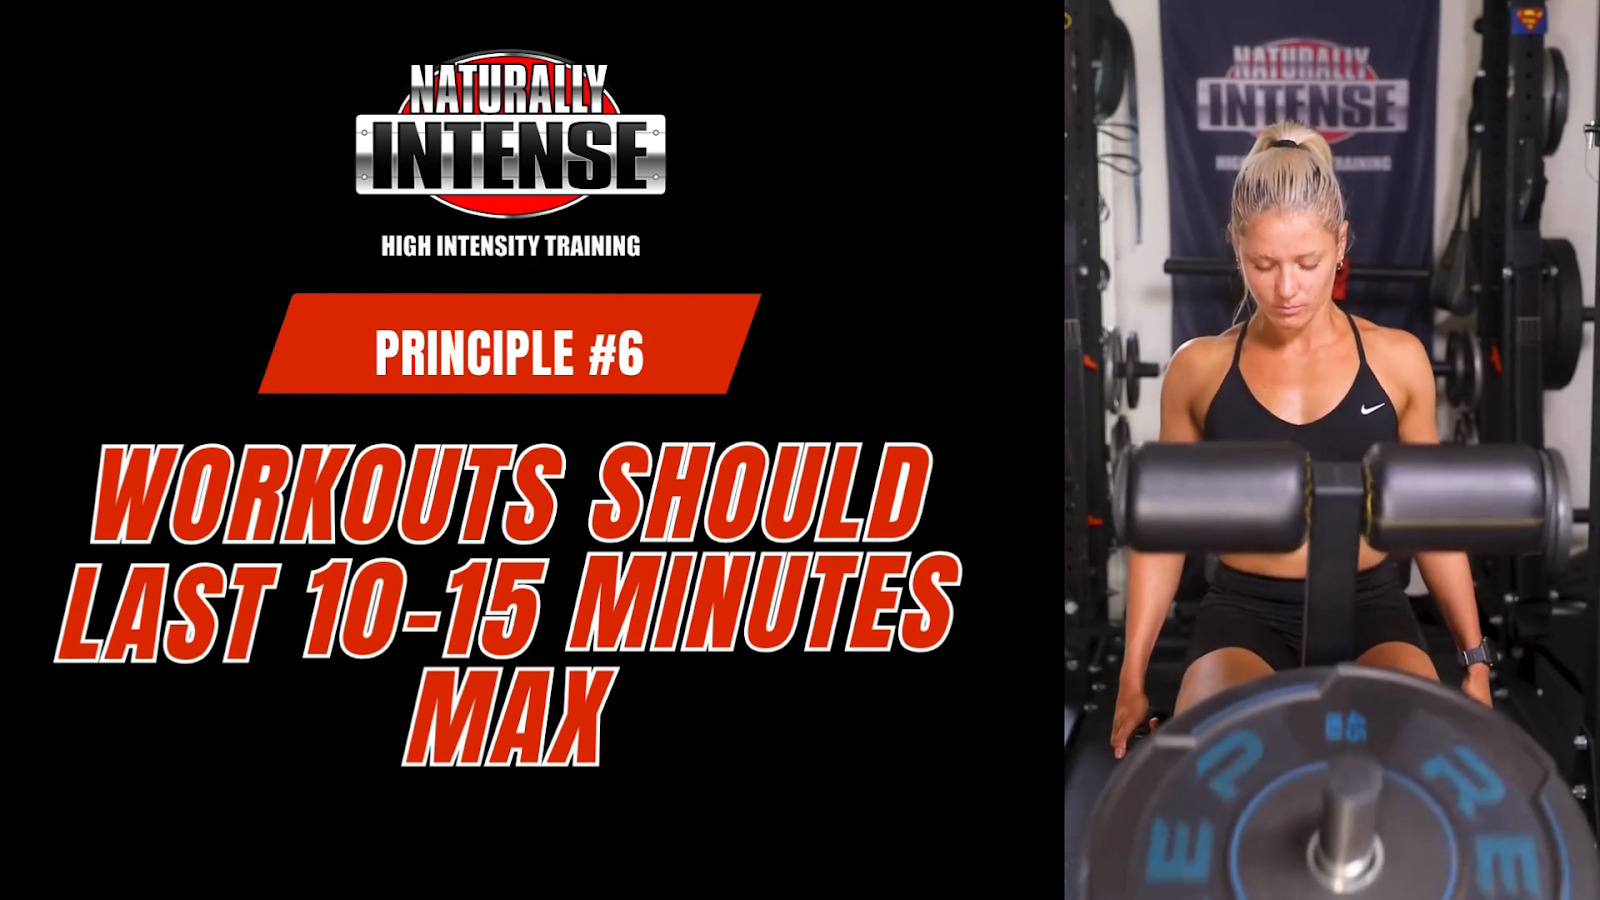 Naturally Intense High Intensity Training workouts should last 10-15 minutes 